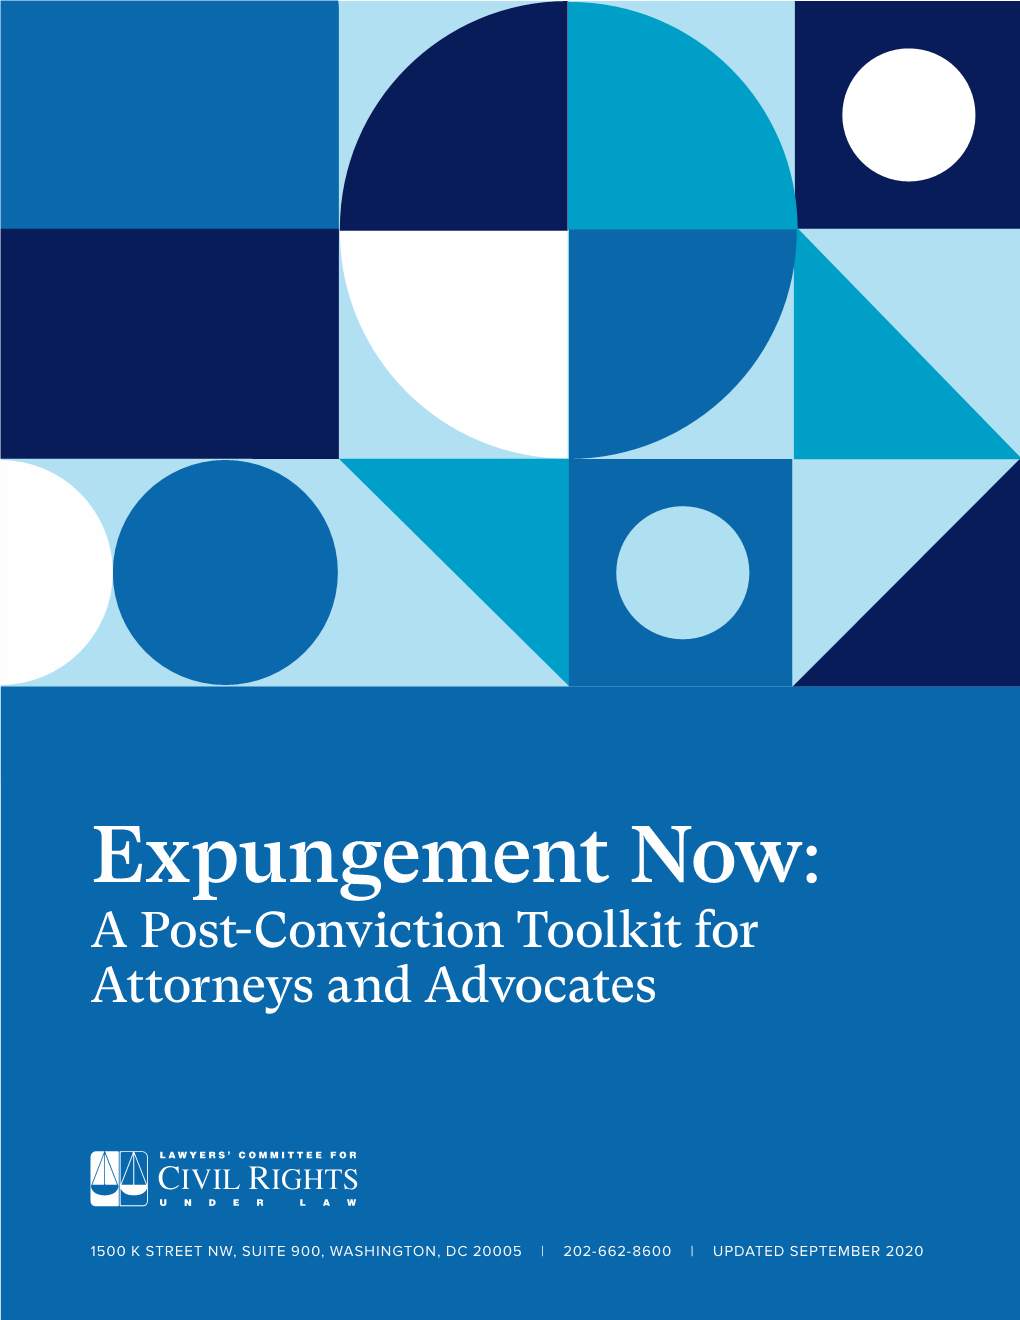 Expungement Now: a Post-Conviction Toolkit for Attorneys and Advocates